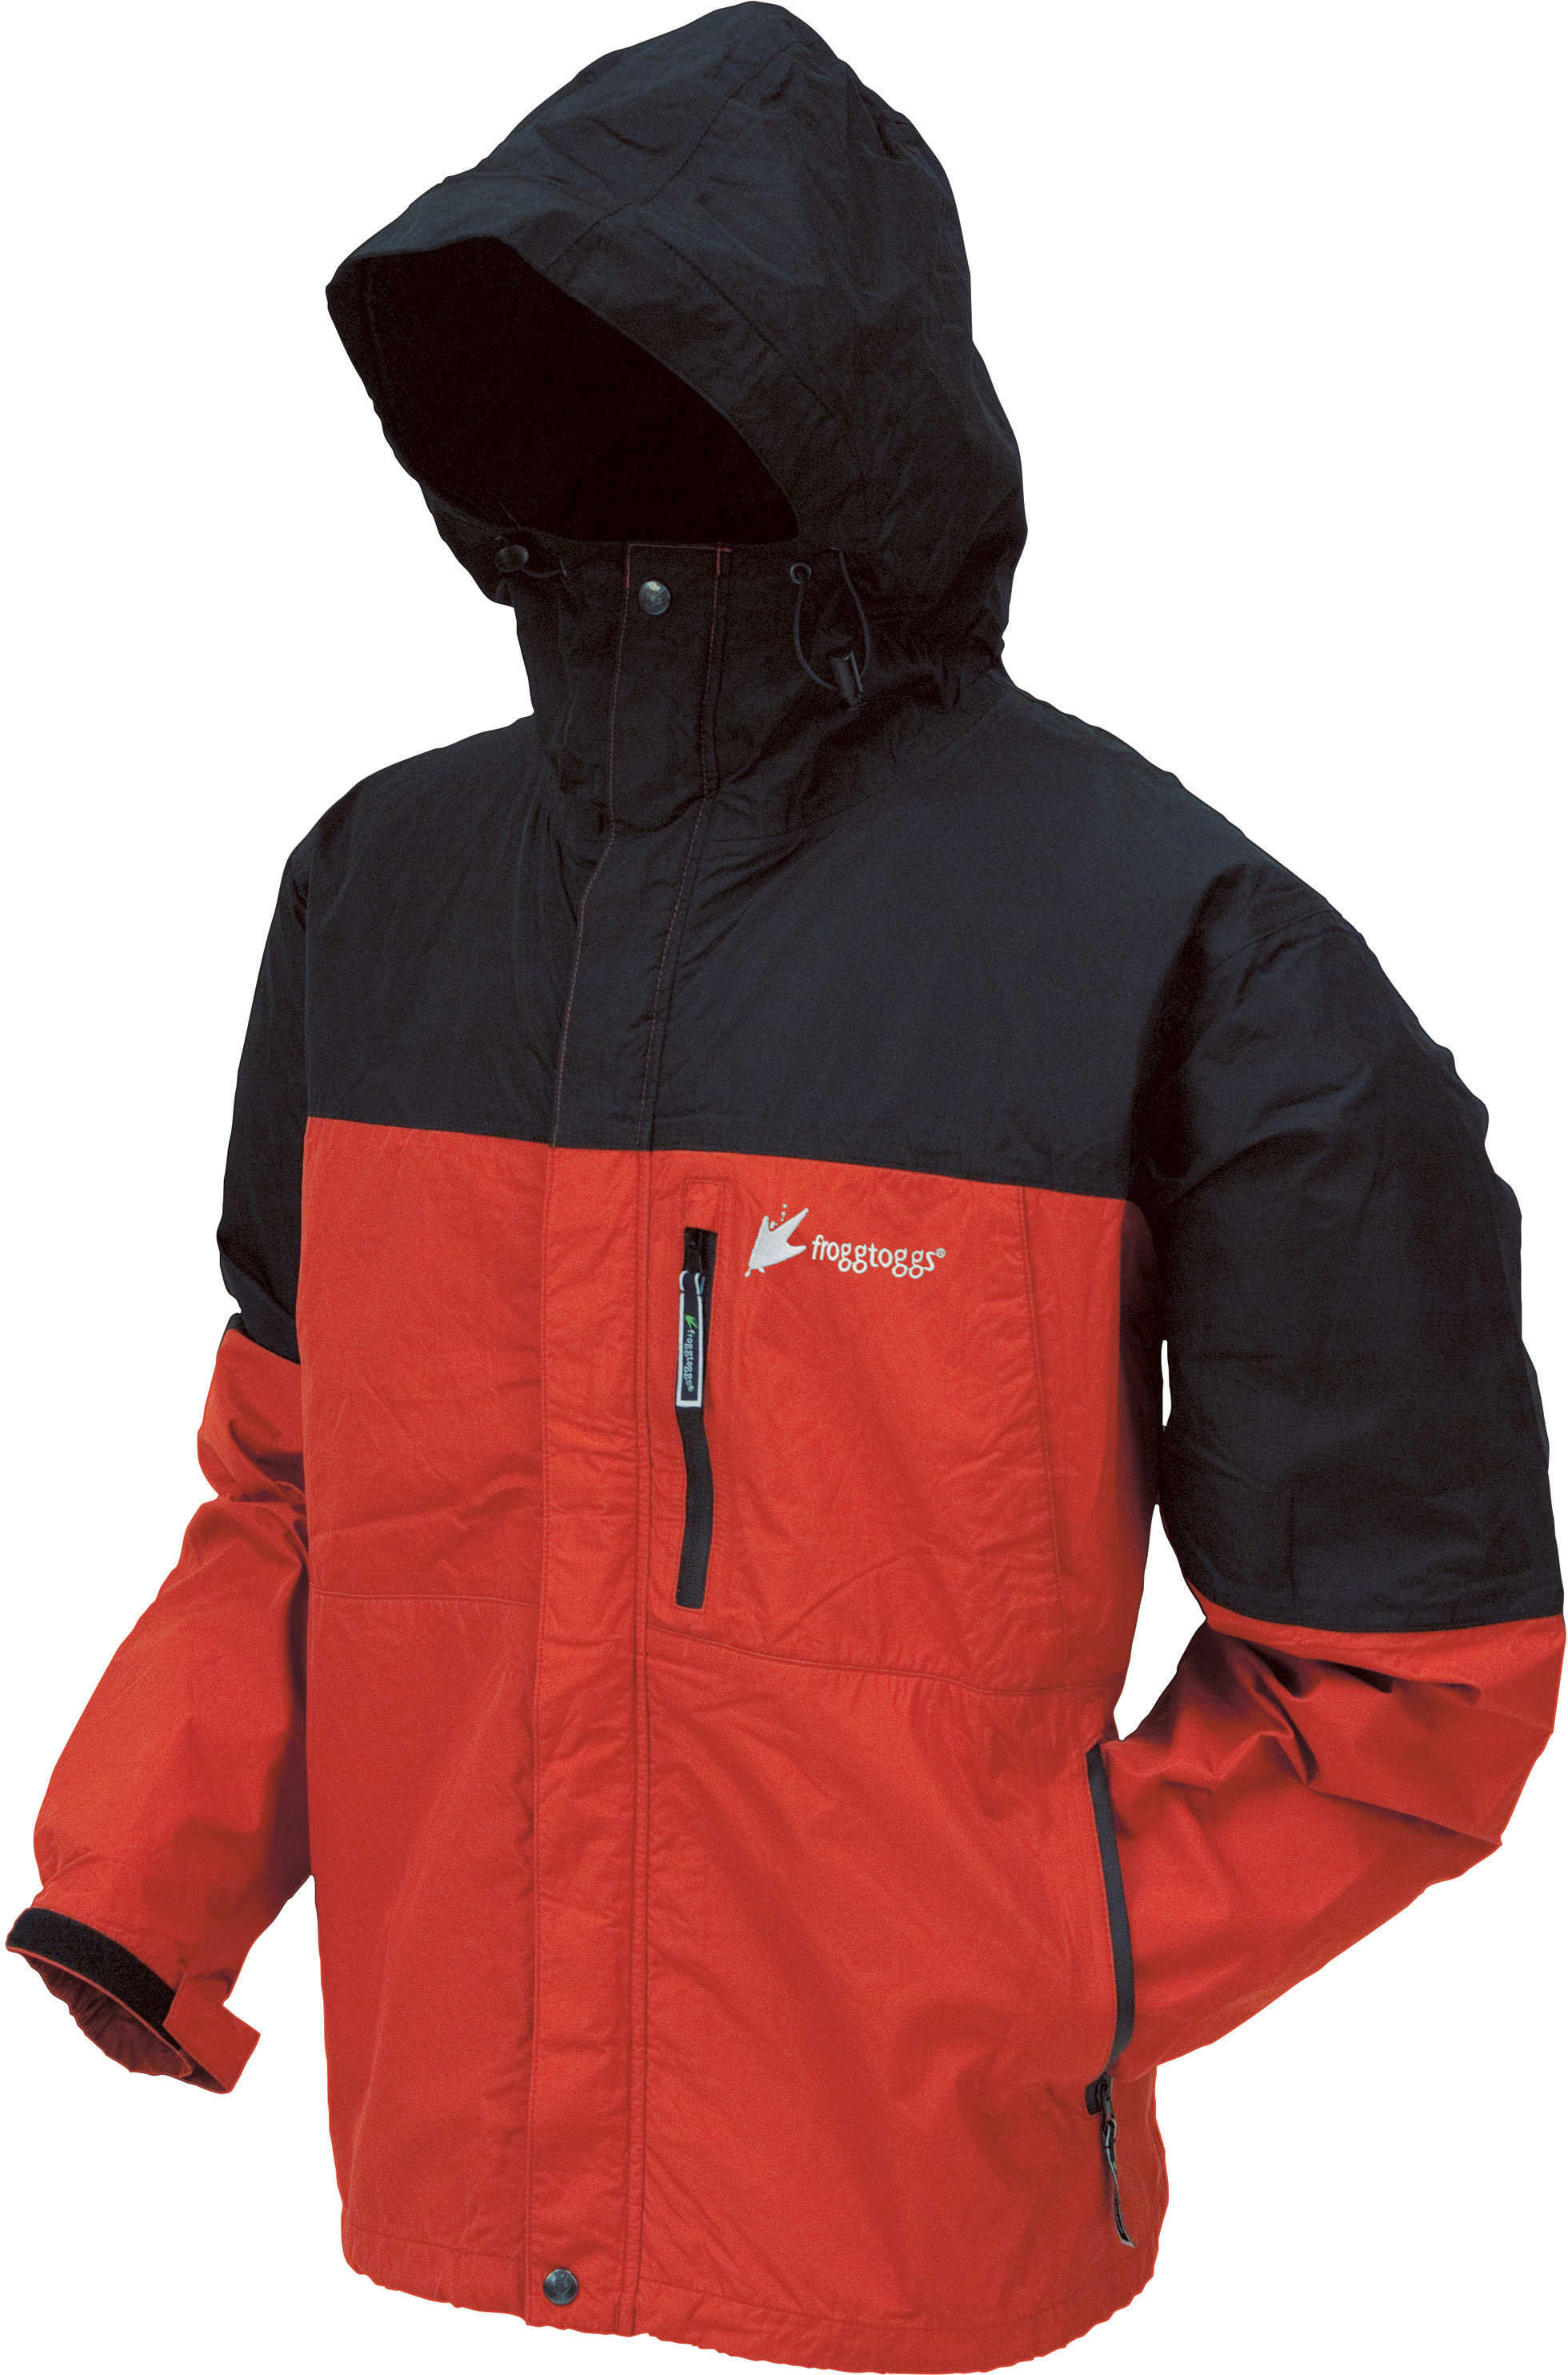 Frogg Toggs Toad-Rage Jacket Red/Black X-Large NT6601-110XL